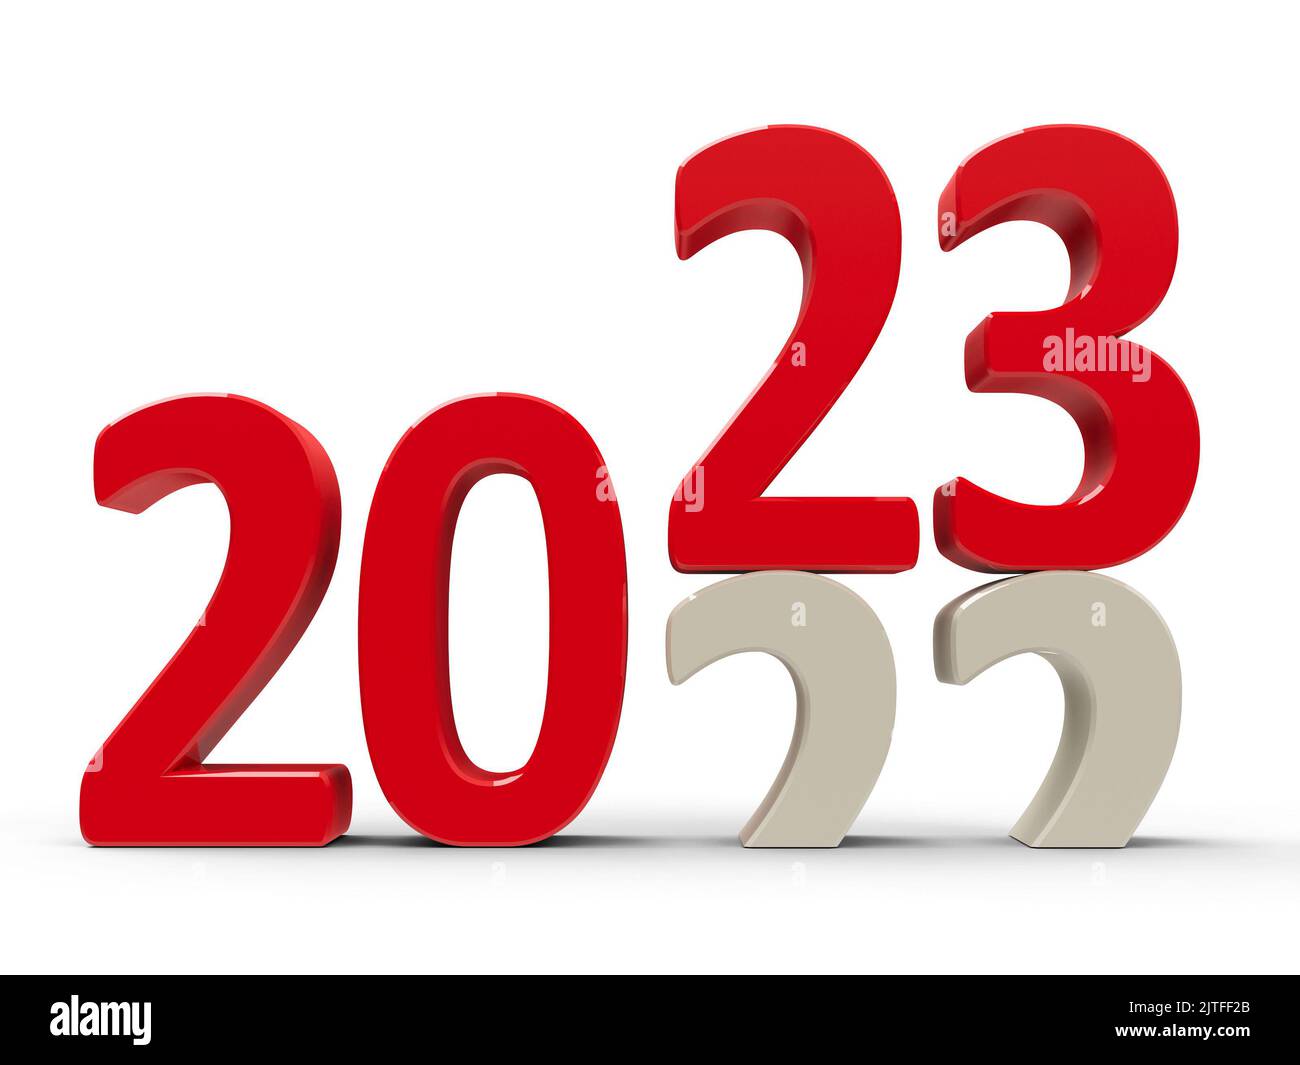 2022-2023 change represents the new year 2023, three-dimensional rendering, 3D illustration Stock Photo